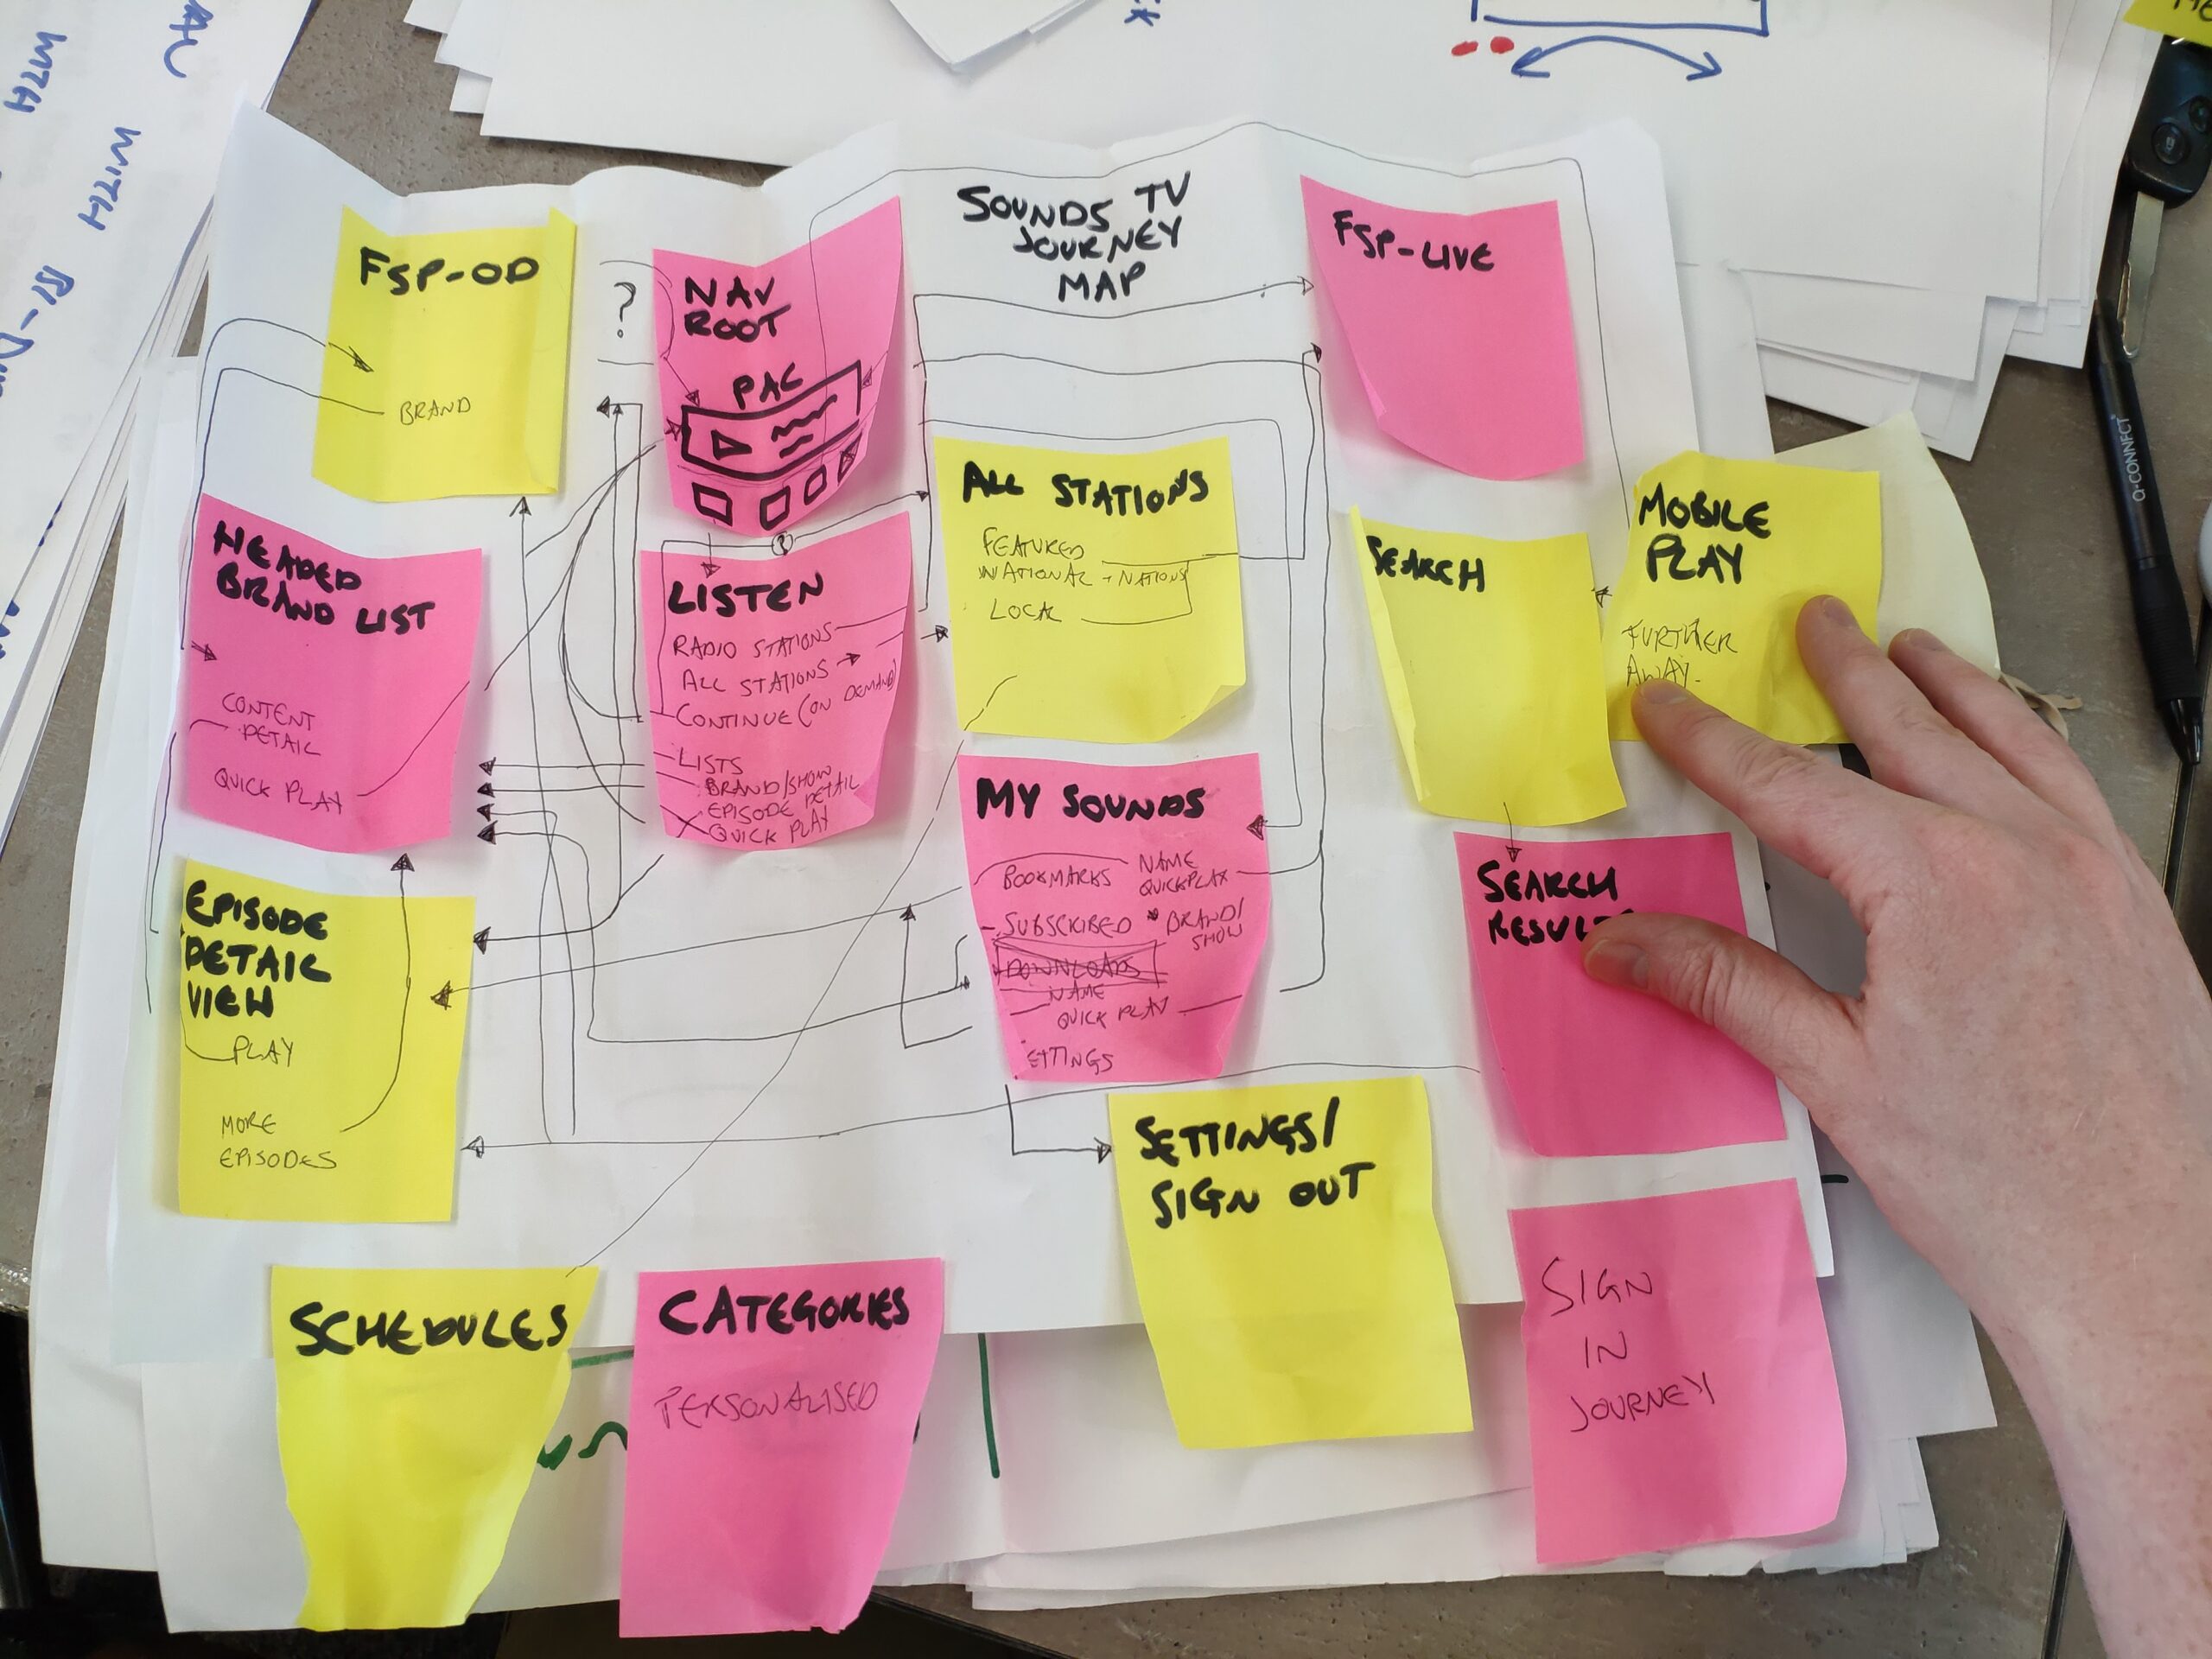 Mapping user journeys